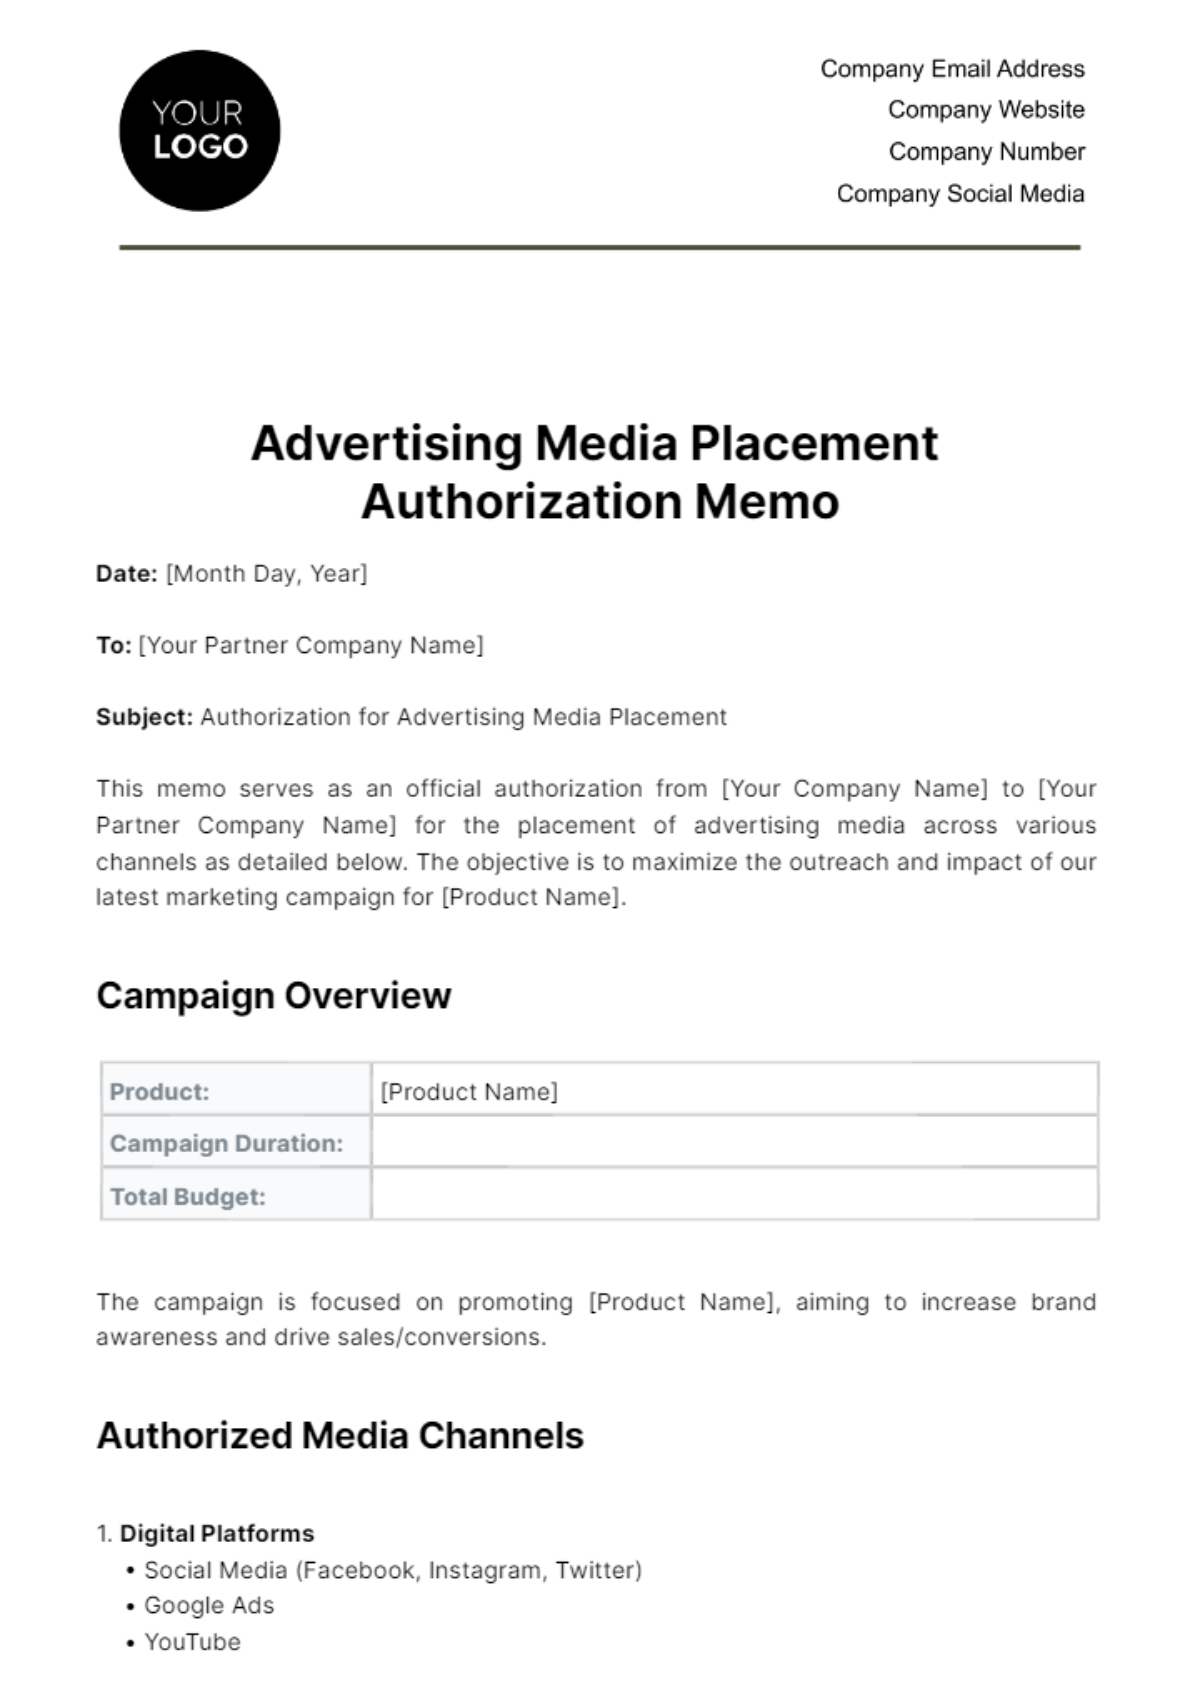 Advertising Media Placement Authorization Memo Template